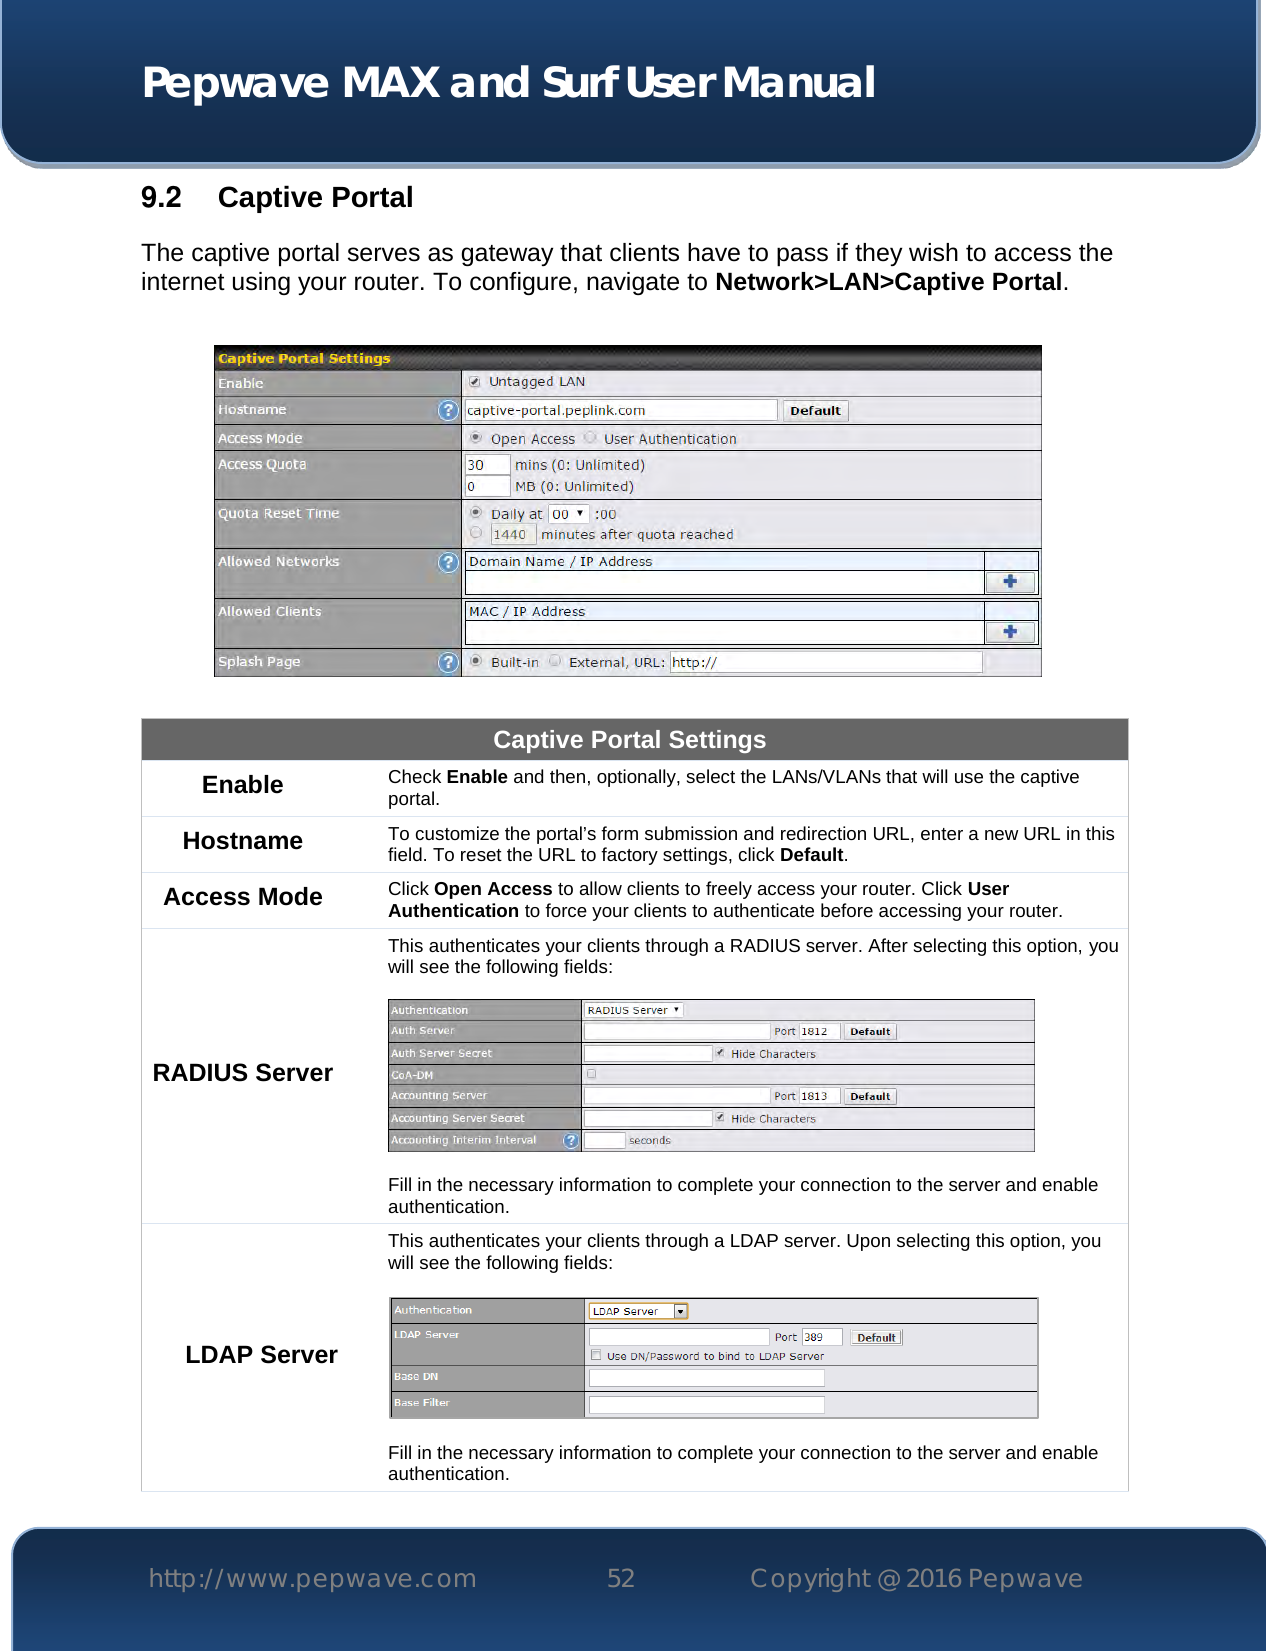  Pepwave MAX and Surf User Manual http://www.pepwave.com 52   Copyright @ 2016 Pepwave   9.2  Captive Portal The captive portal serves as gateway that clients have to pass if they wish to access the internet using your router. To configure, navigate to Network&gt;LAN&gt;Captive Portal.    Captive Portal Settings Enable Check Enable and then, optionally, select the LANs/VLANs that will use the captive portal.  Hostname To customize the portal’s form submission and redirection URL, enter a new URL in this field. To reset the URL to factory settings, click Default. Access Mode Click Open Access to allow clients to freely access your router. Click User Authentication to force your clients to authenticate before accessing your router. RADIUS Server This authenticates your clients through a RADIUS server. After selecting this option, you will see the following fields:    Fill in the necessary information to complete your connection to the server and enable authentication. LDAP Server This authenticates your clients through a LDAP server. Upon selecting this option, you will see the following fields:    Fill in the necessary information to complete your connection to the server and enable authentication. 